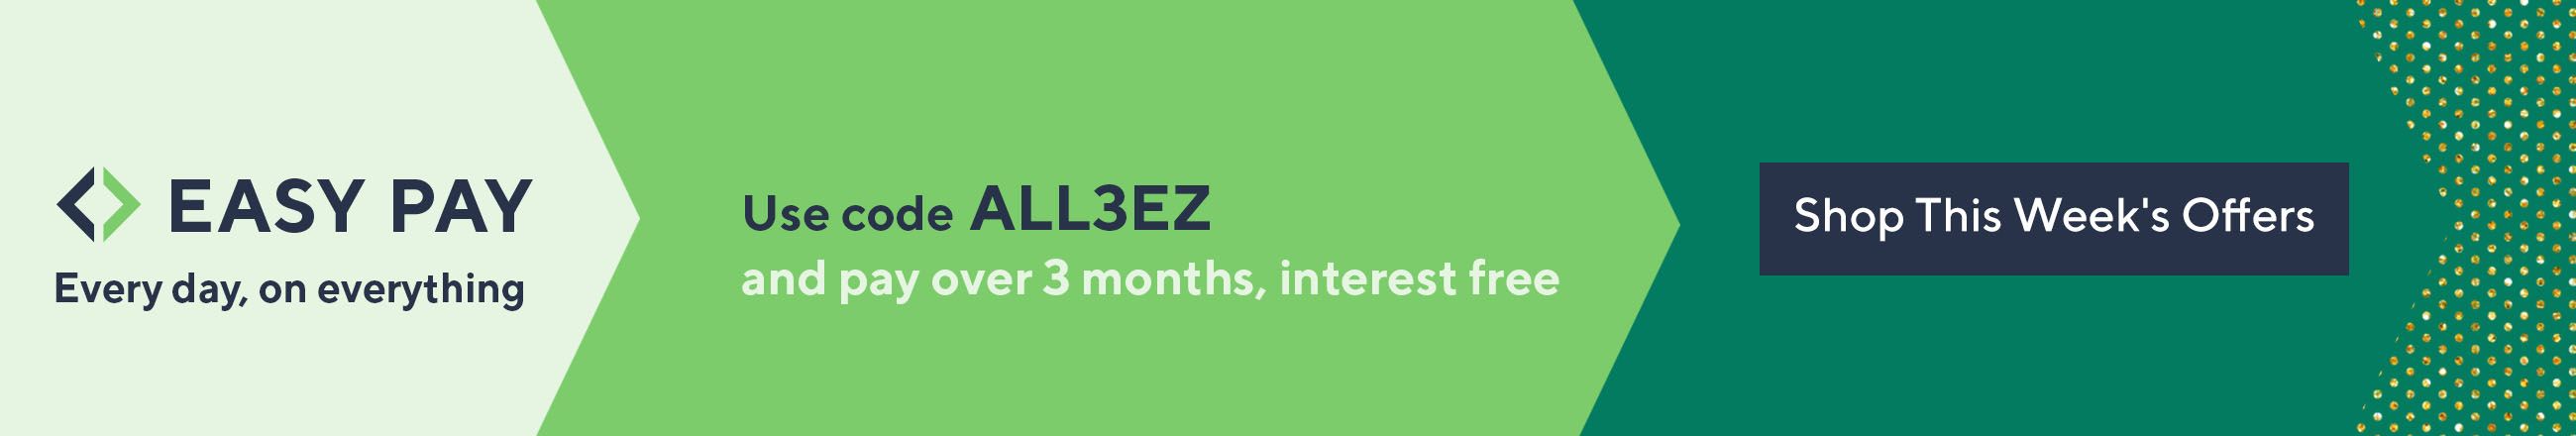 Pay for everything in 3 interest-free instalments with code ALL3EZ